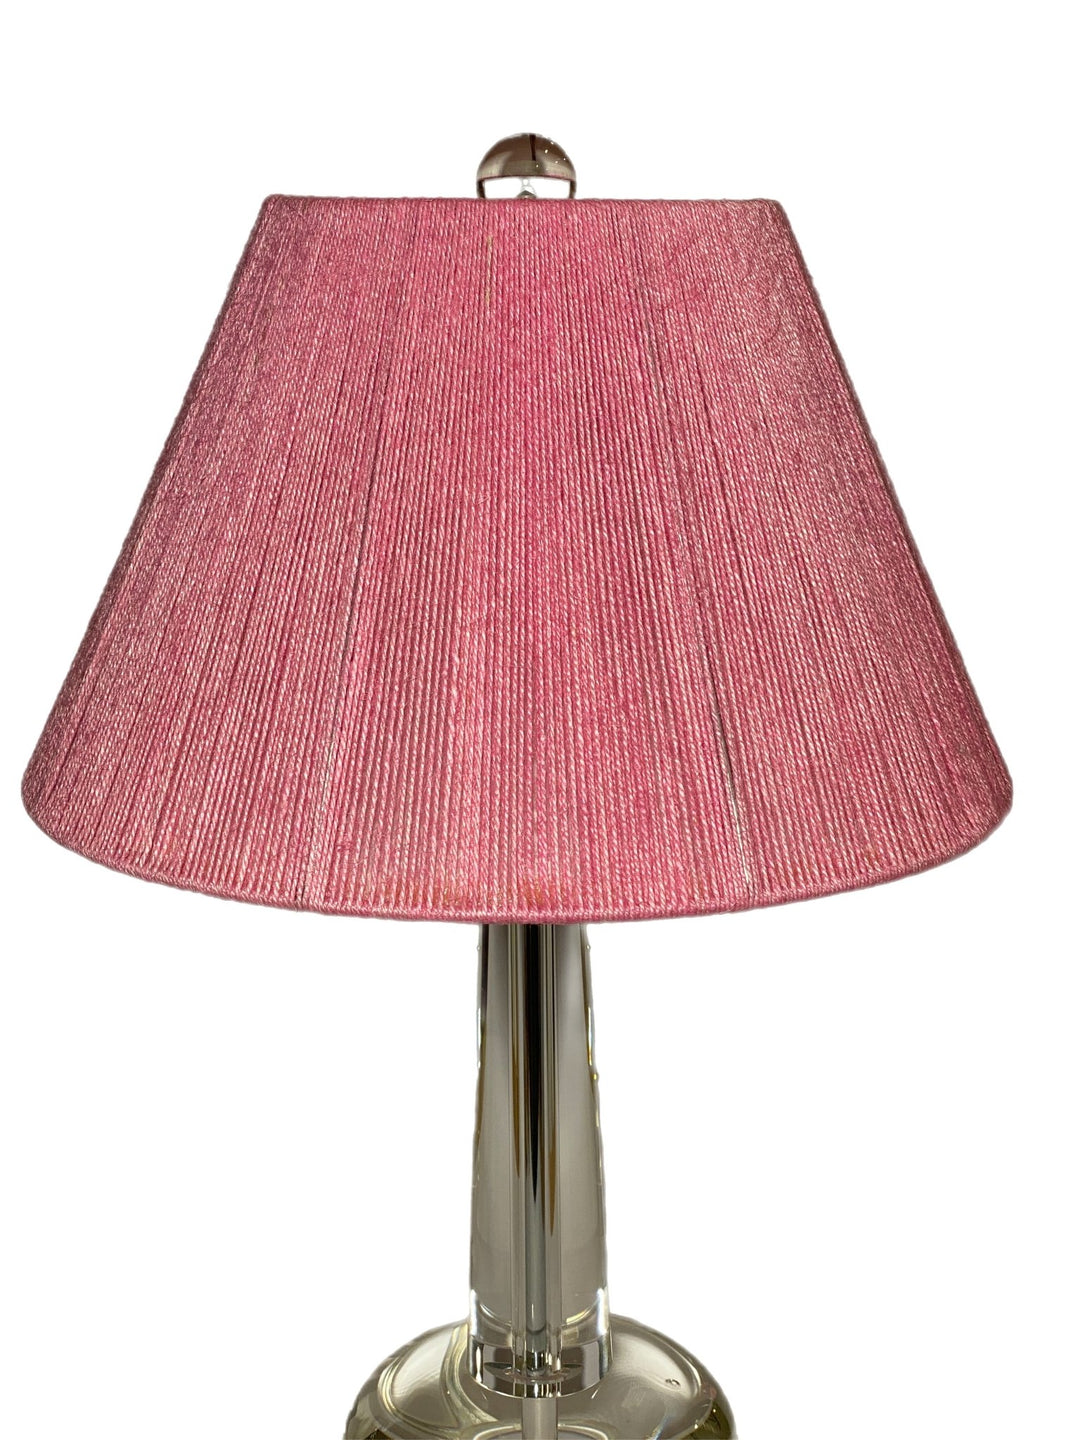 16" Haute Pink Jute String Empire Lamp shade - Lux Lamp Shades